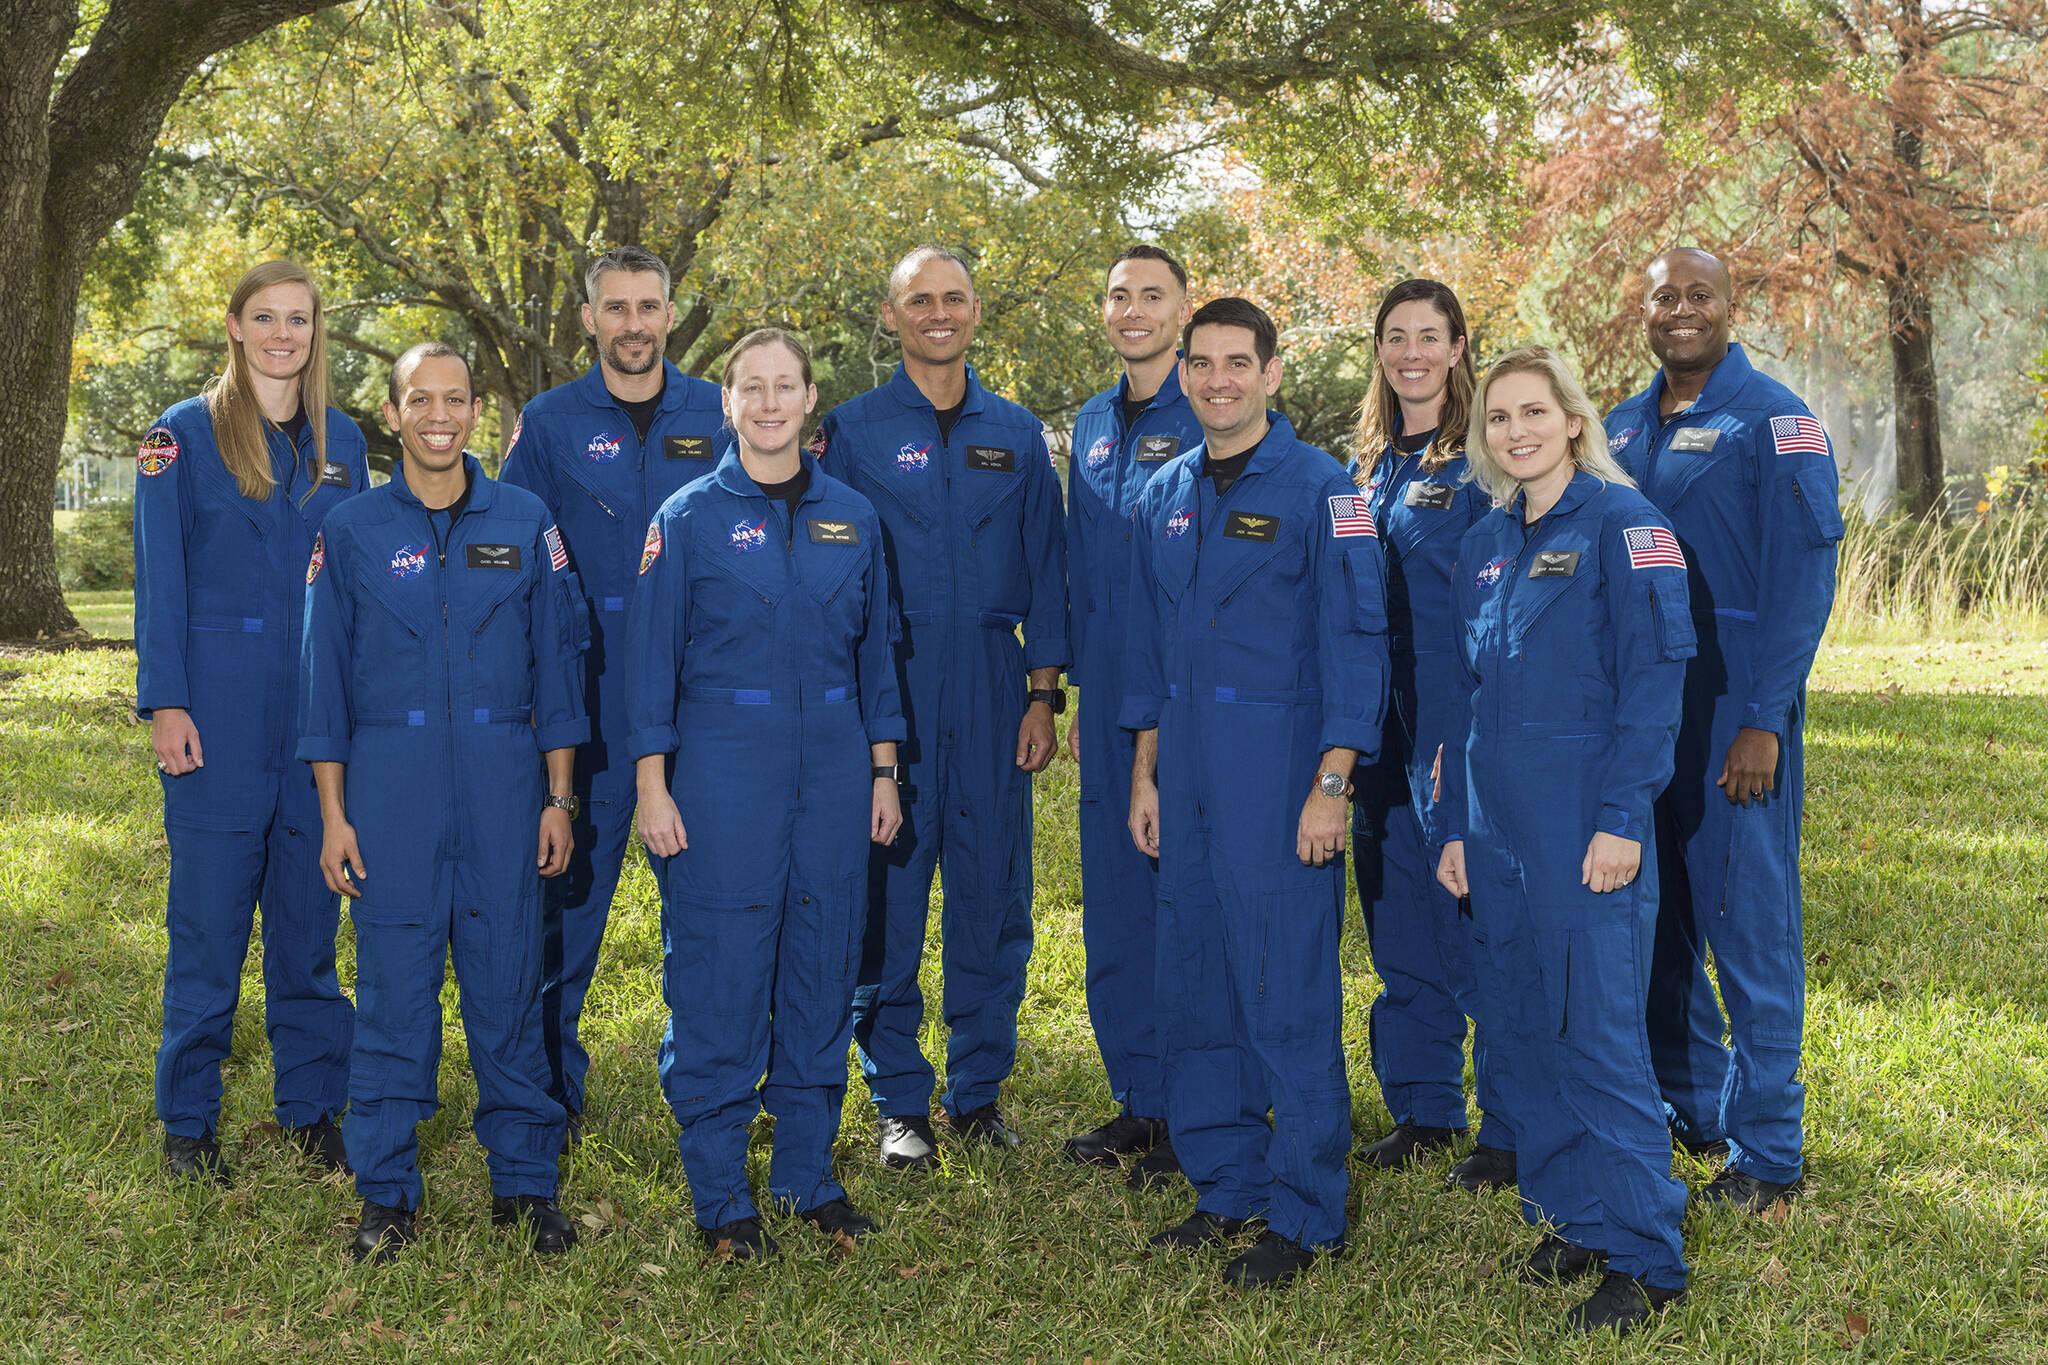 This photo provided by NASA shows its 2021 astronaut candidate class, announced on Monday, Dec. 6, 2021. The 10 candidates stand for a photo at the Johnson Space Center in Houston on Dec. 3, 2021. From left are U.S. Air Force Maj. Nichole Ayers, Christopher Williams, U.S. Marine Corps Maj. (retired.) Luke Delaney, U.S. Navy Lt. Cmdr. Jessica Wittner, U.S. Air Force Lt. Col. Anil Menon, U.S. Air Force Maj. Marcos Berríos, U.S. Navy Cmdr. Jack Hathaway, Christina Birch, U.S. Navy Lt. Deniz Burnham, and Andre Douglas. (Robert Markowitz / NASA)